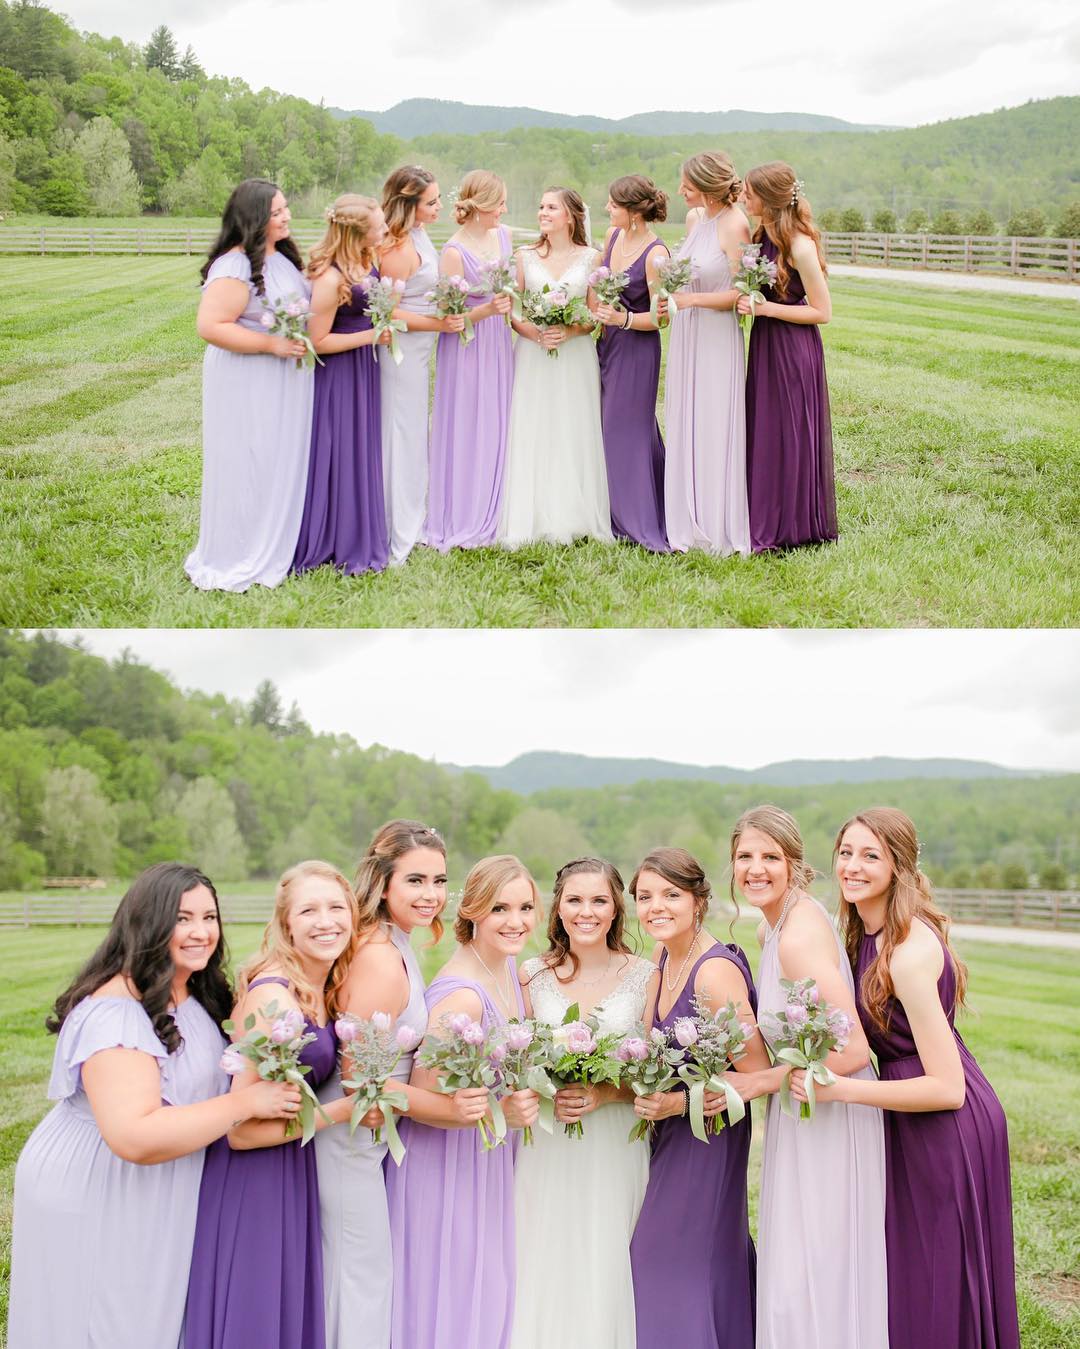 Beautiful mismatched perfectly matched bridesmaid dresses!